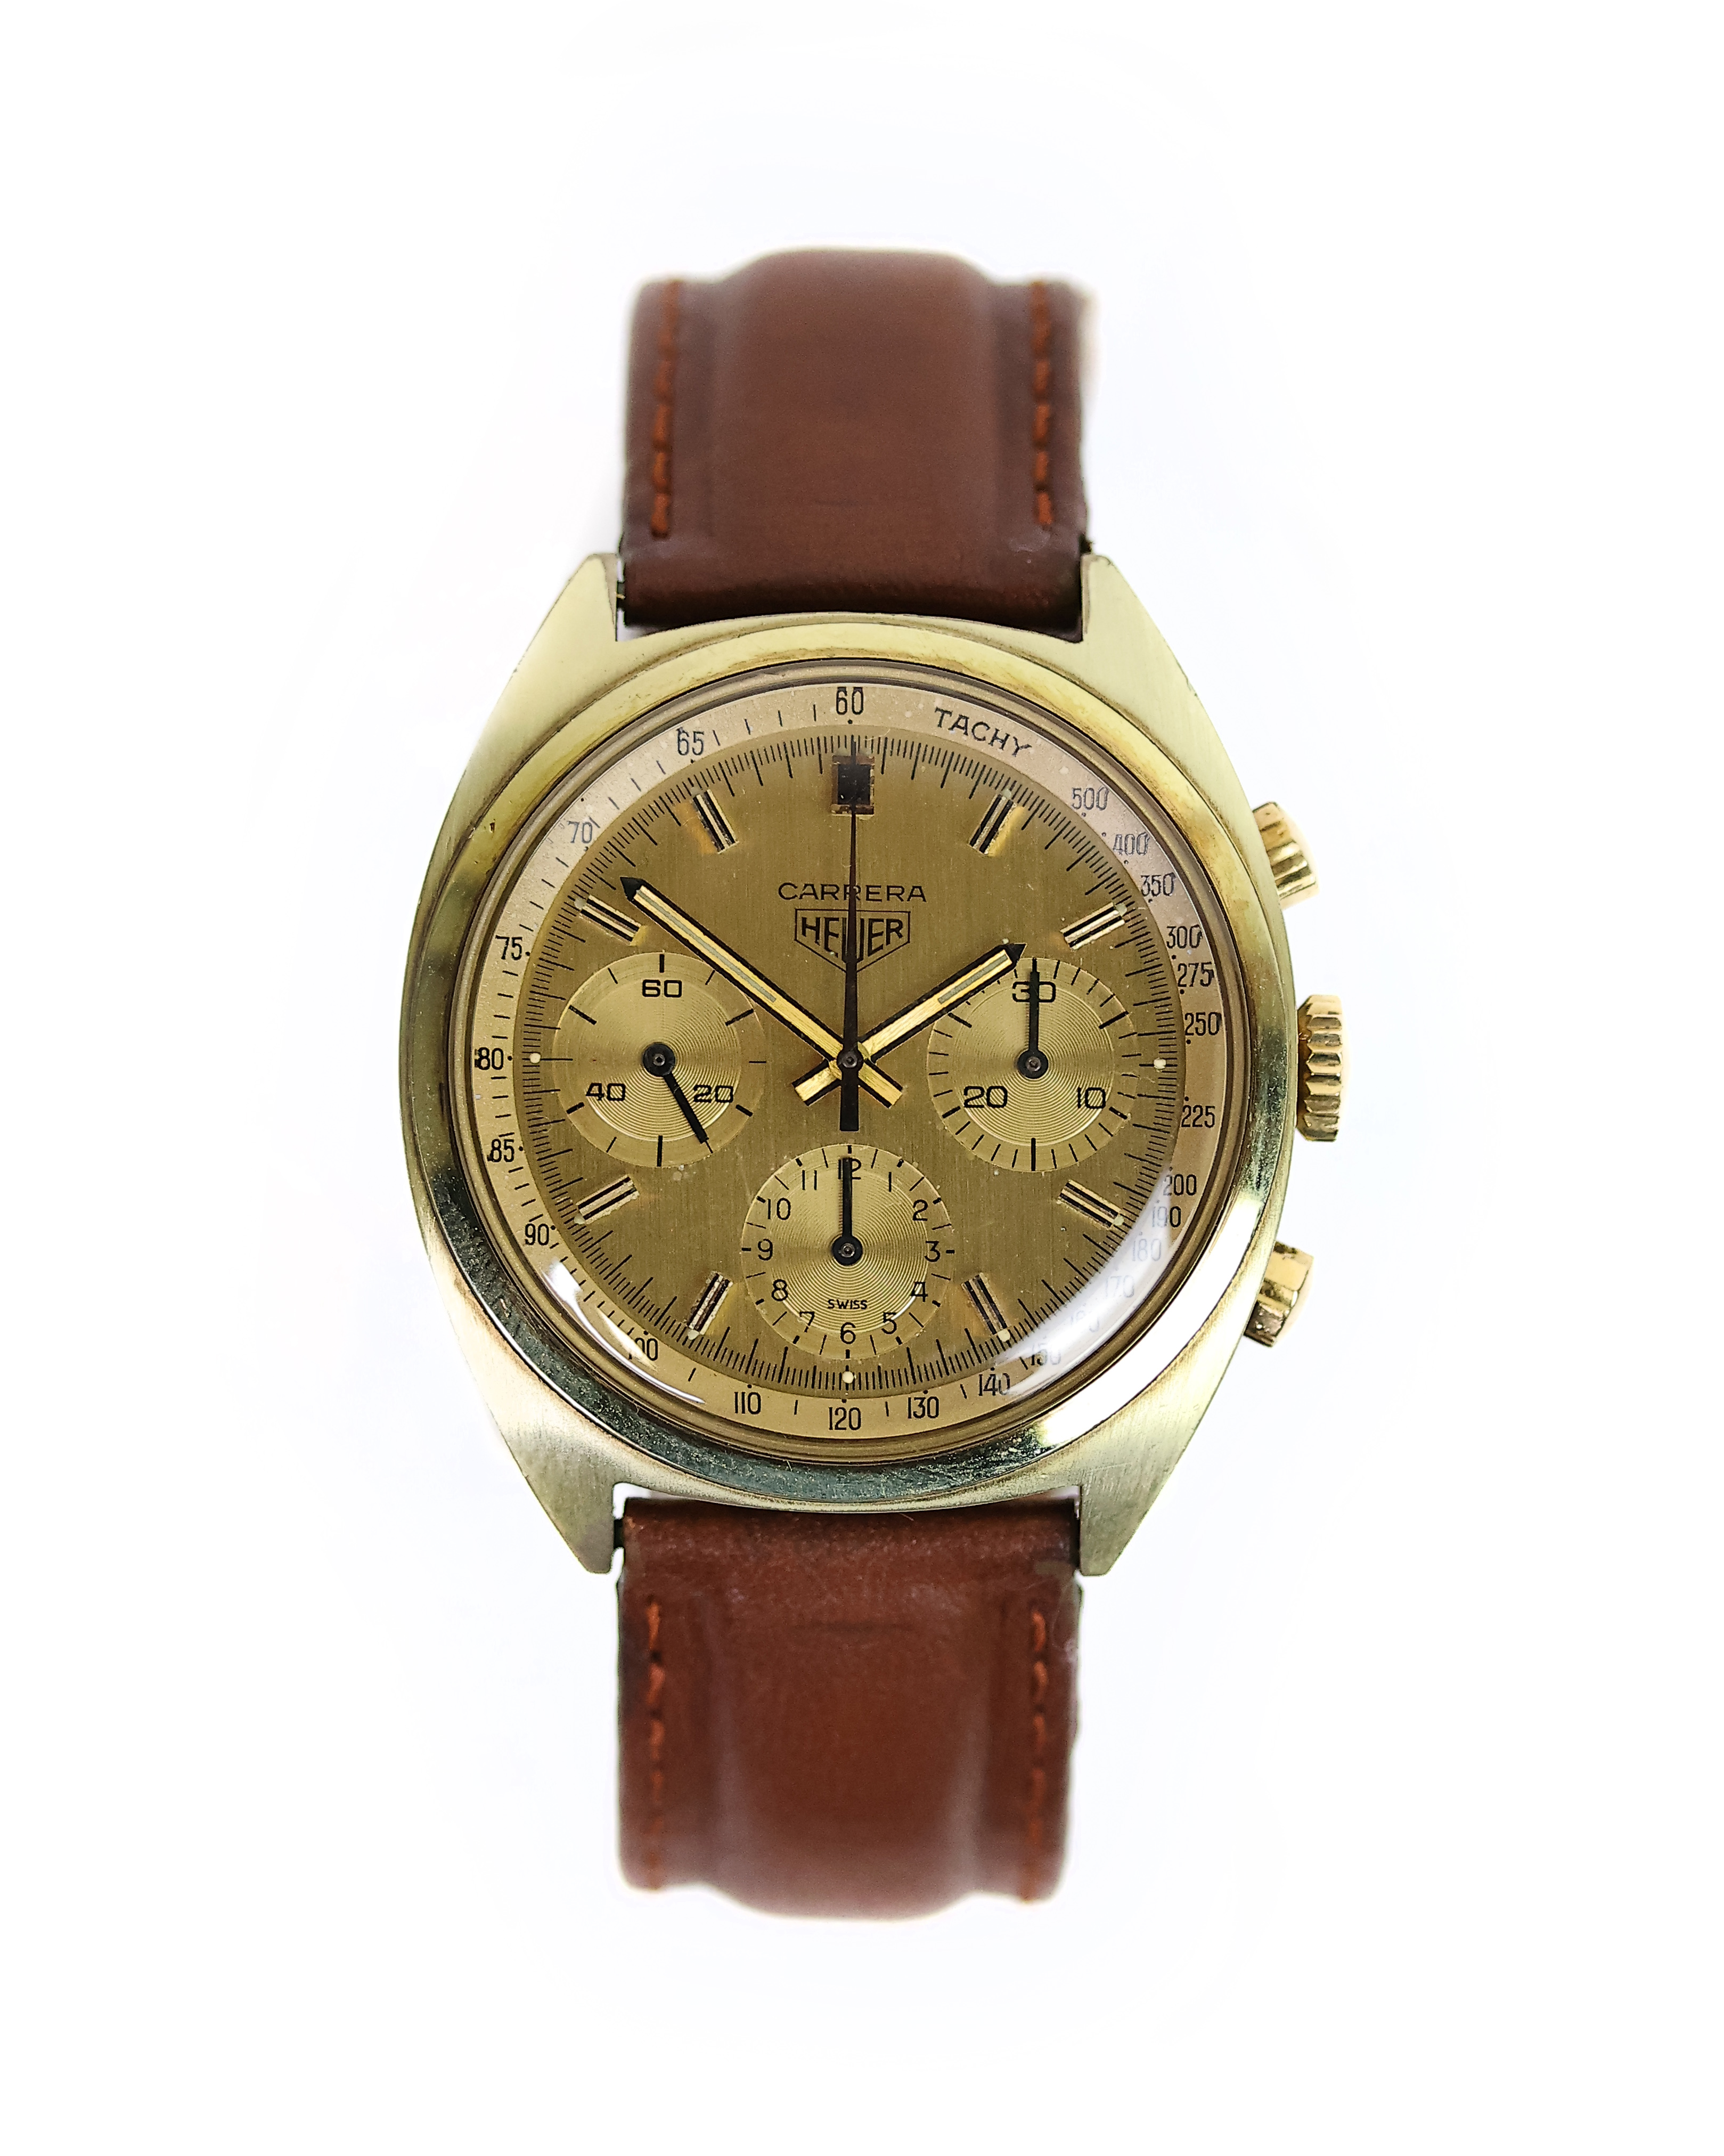 VINTAGE HEUER CARRERA CHRONOGRAPH REFERENCE 73655 - Image 2 of 3